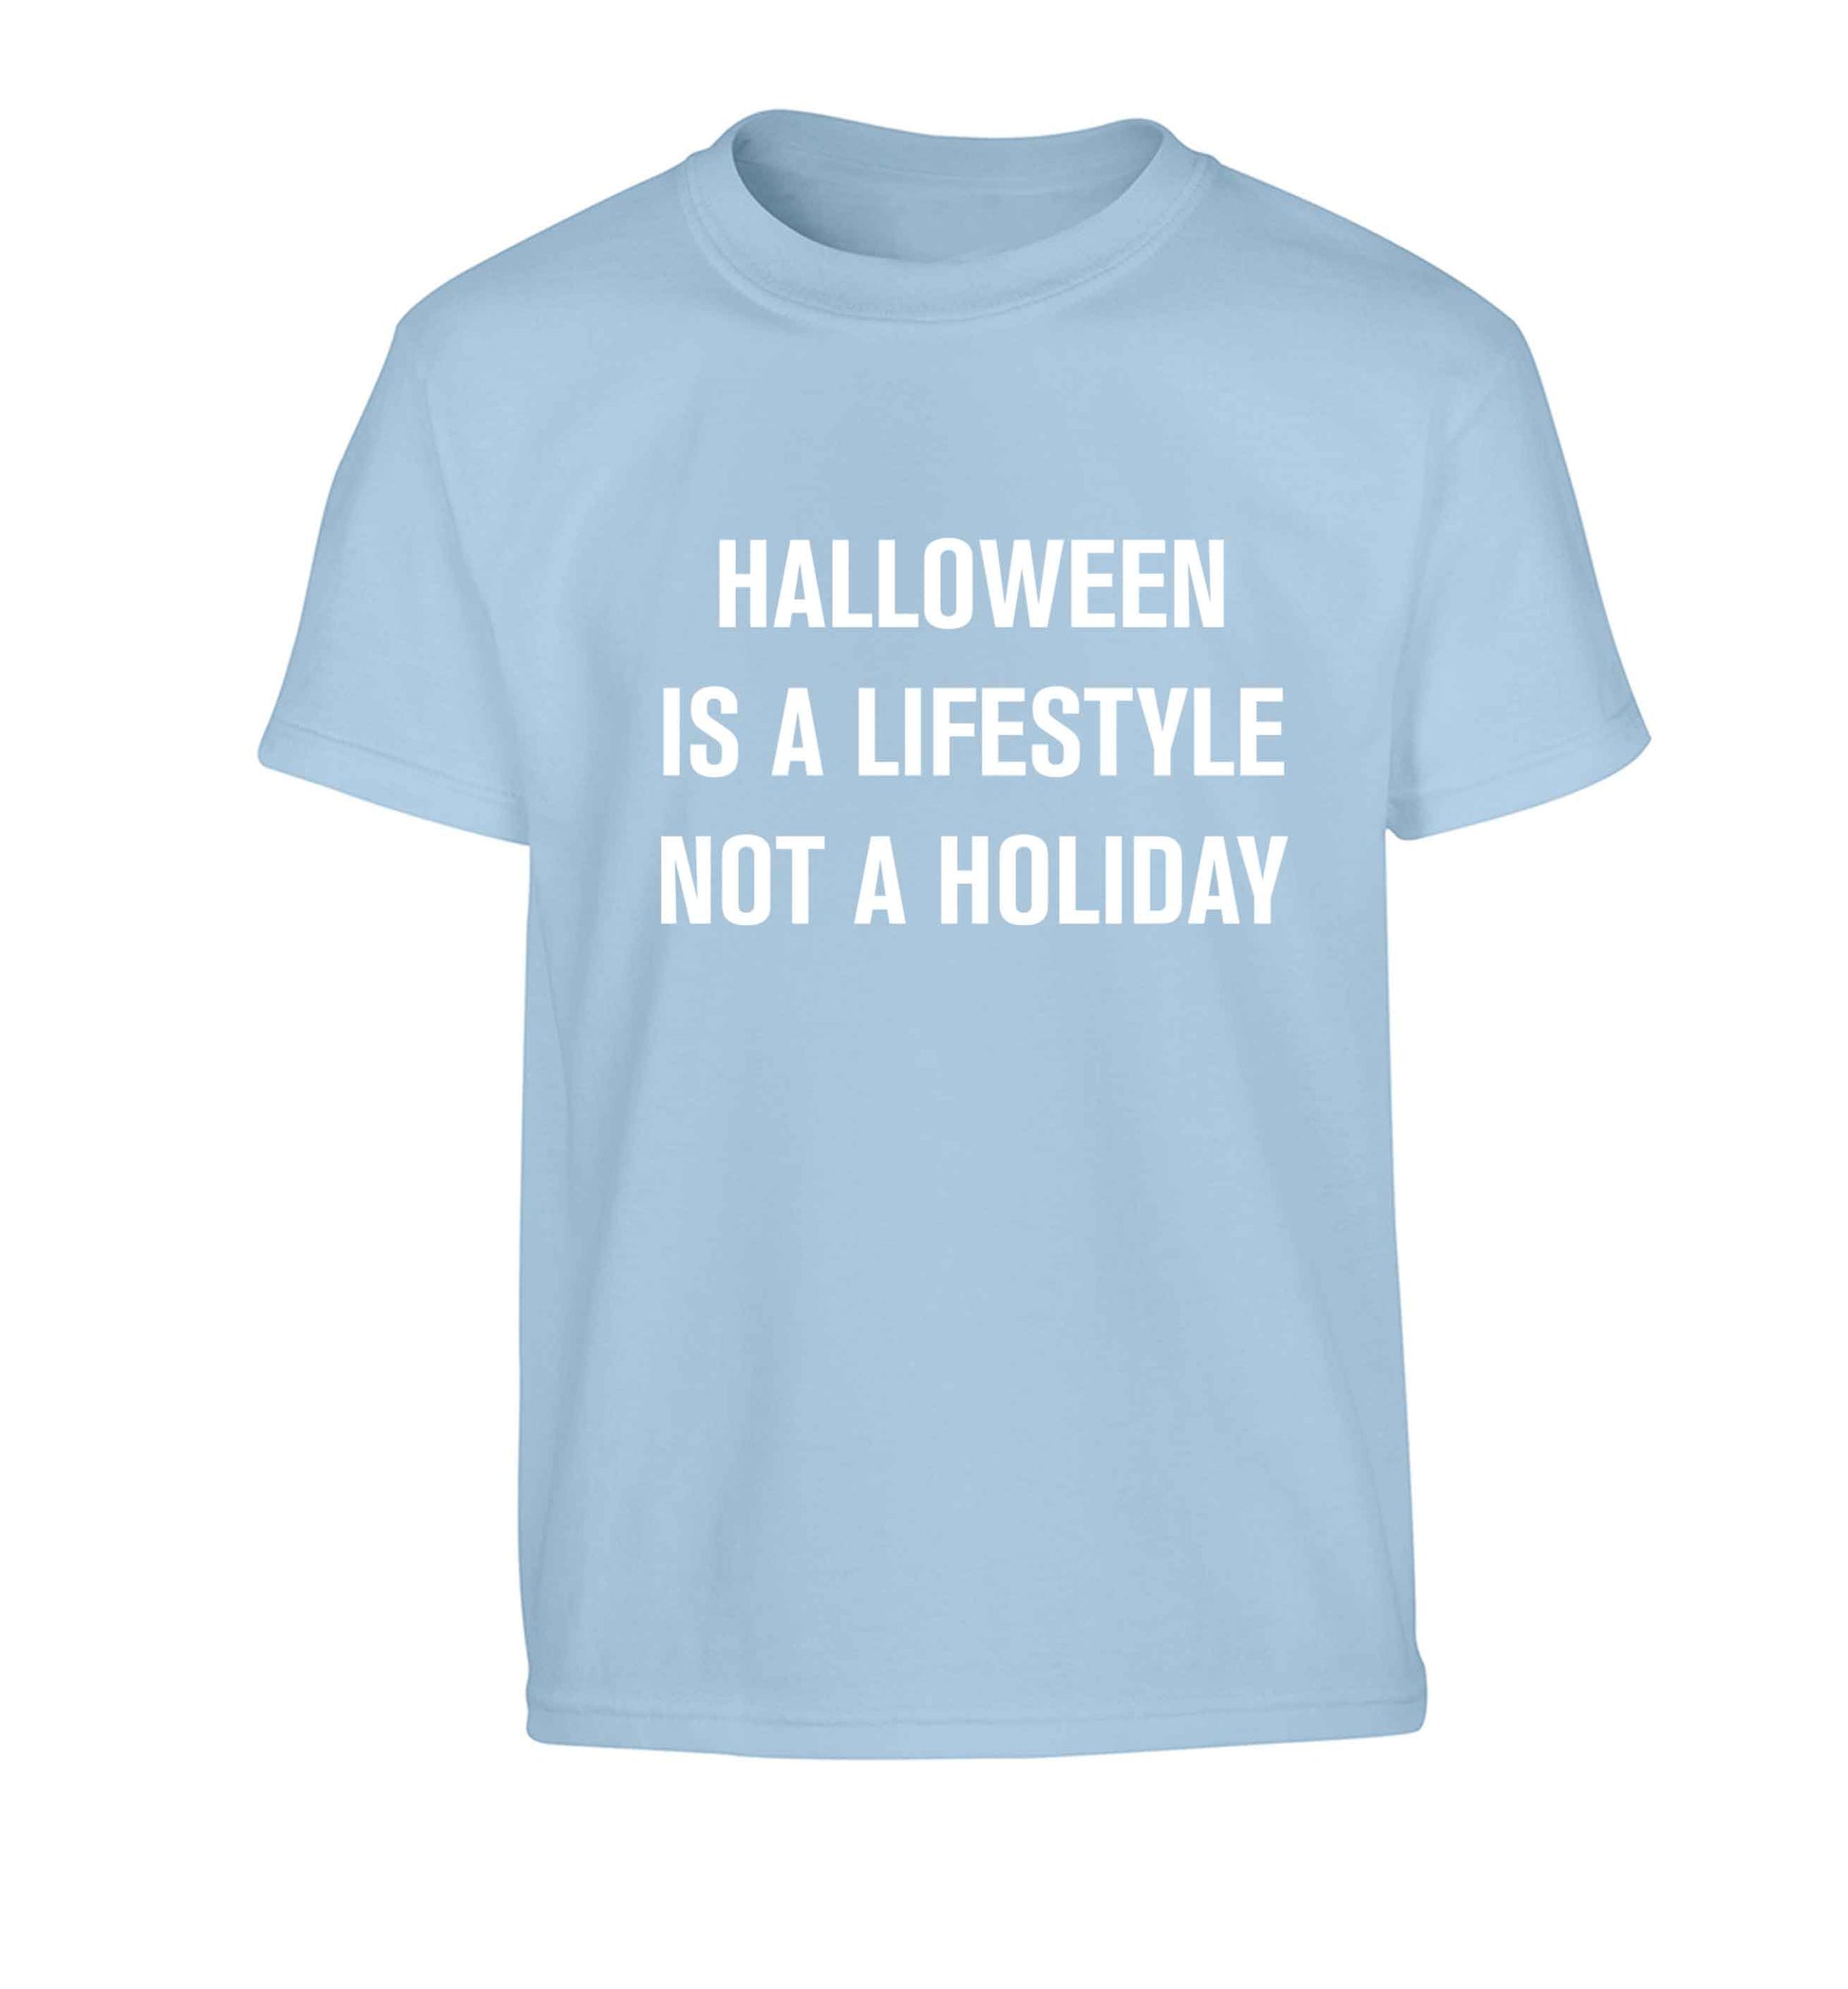 Halloween is a lifestyle not a holiday Children's light blue Tshirt 12-13 Years